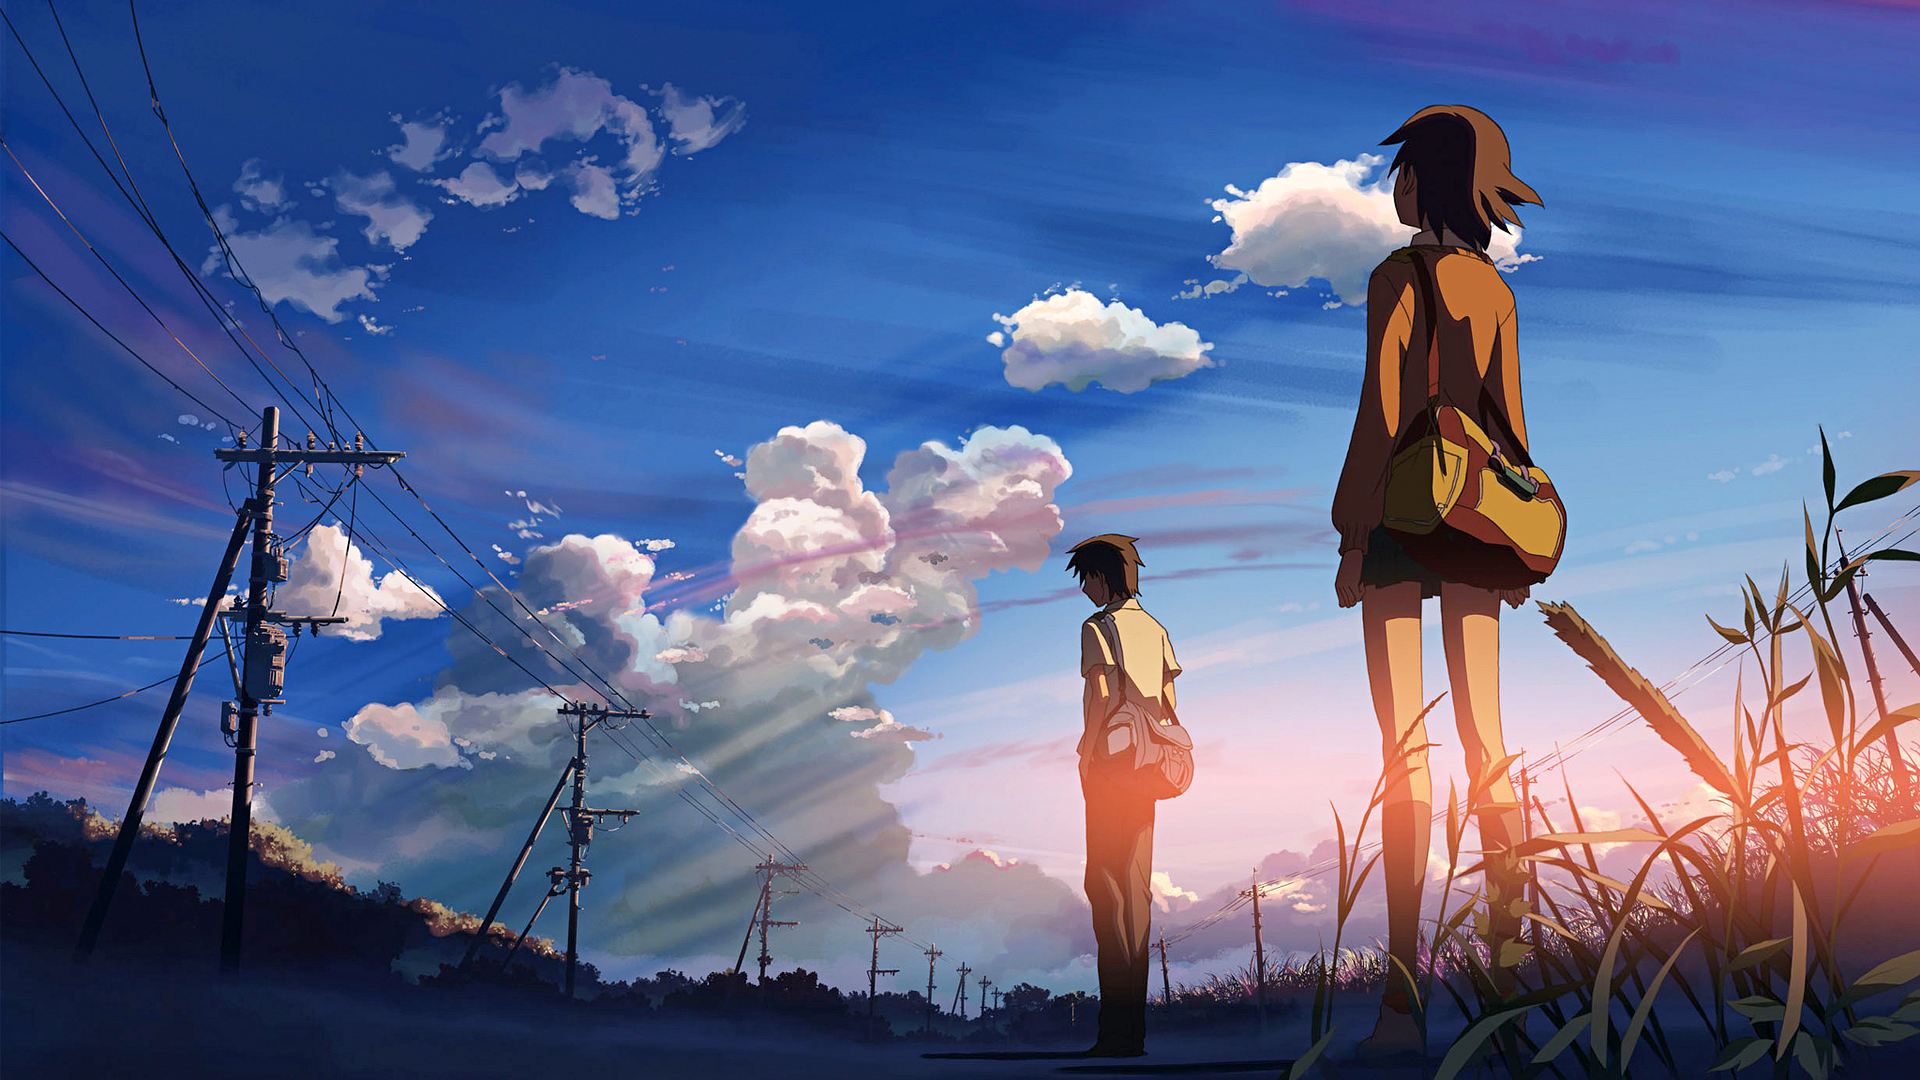 What Japanese anime has the most beautiful visuals? - Quora